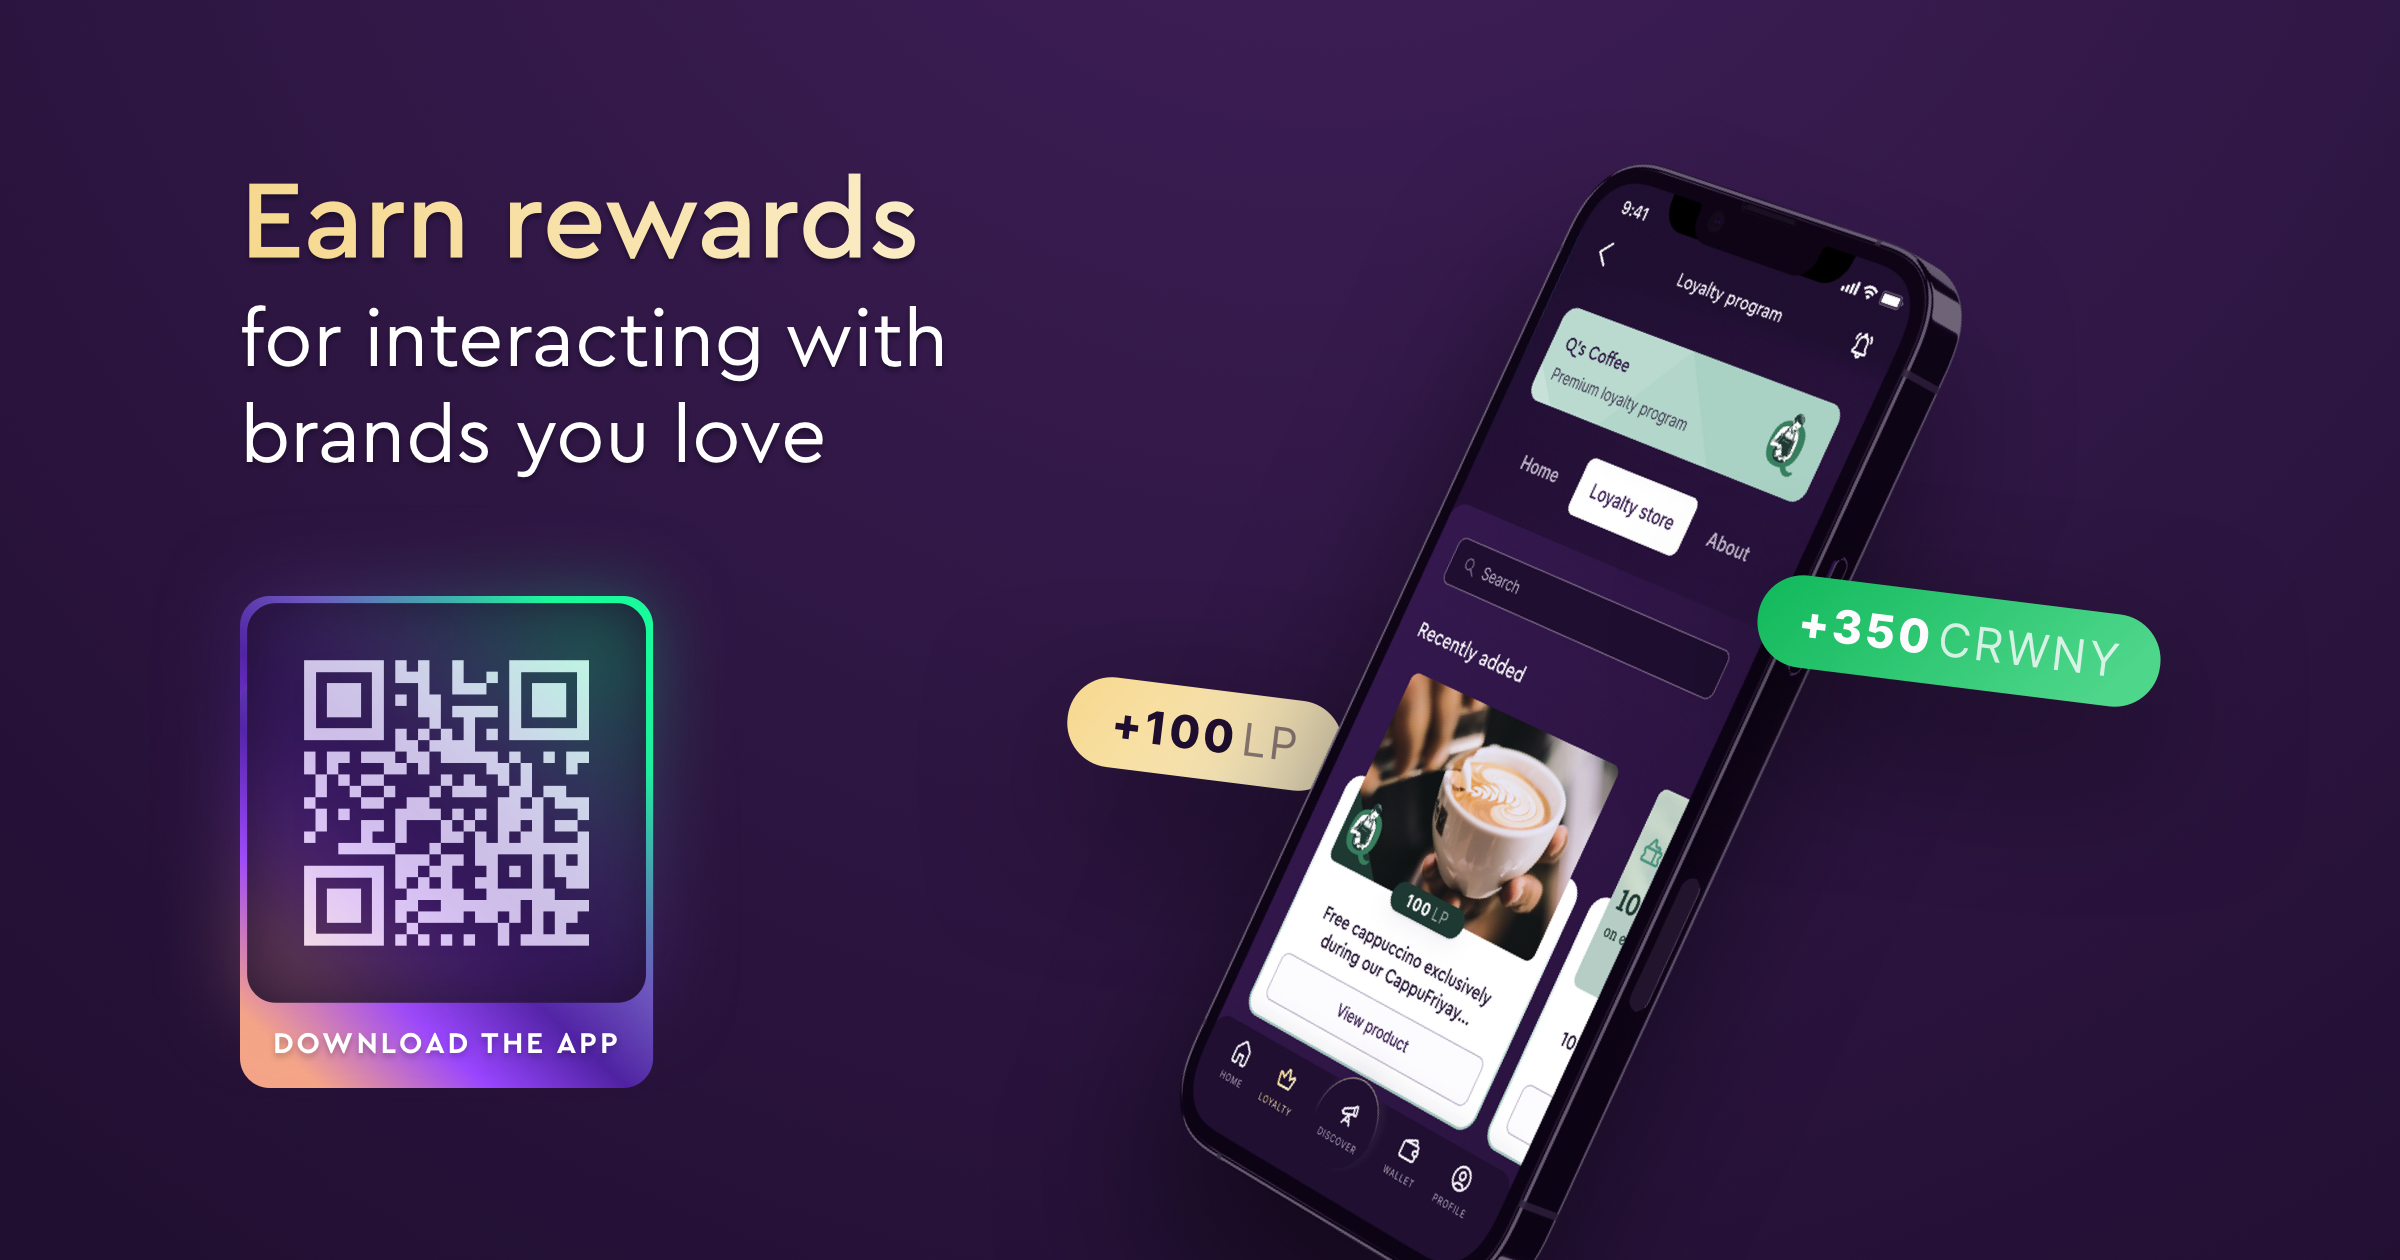 Crowny App featured image earn rewards